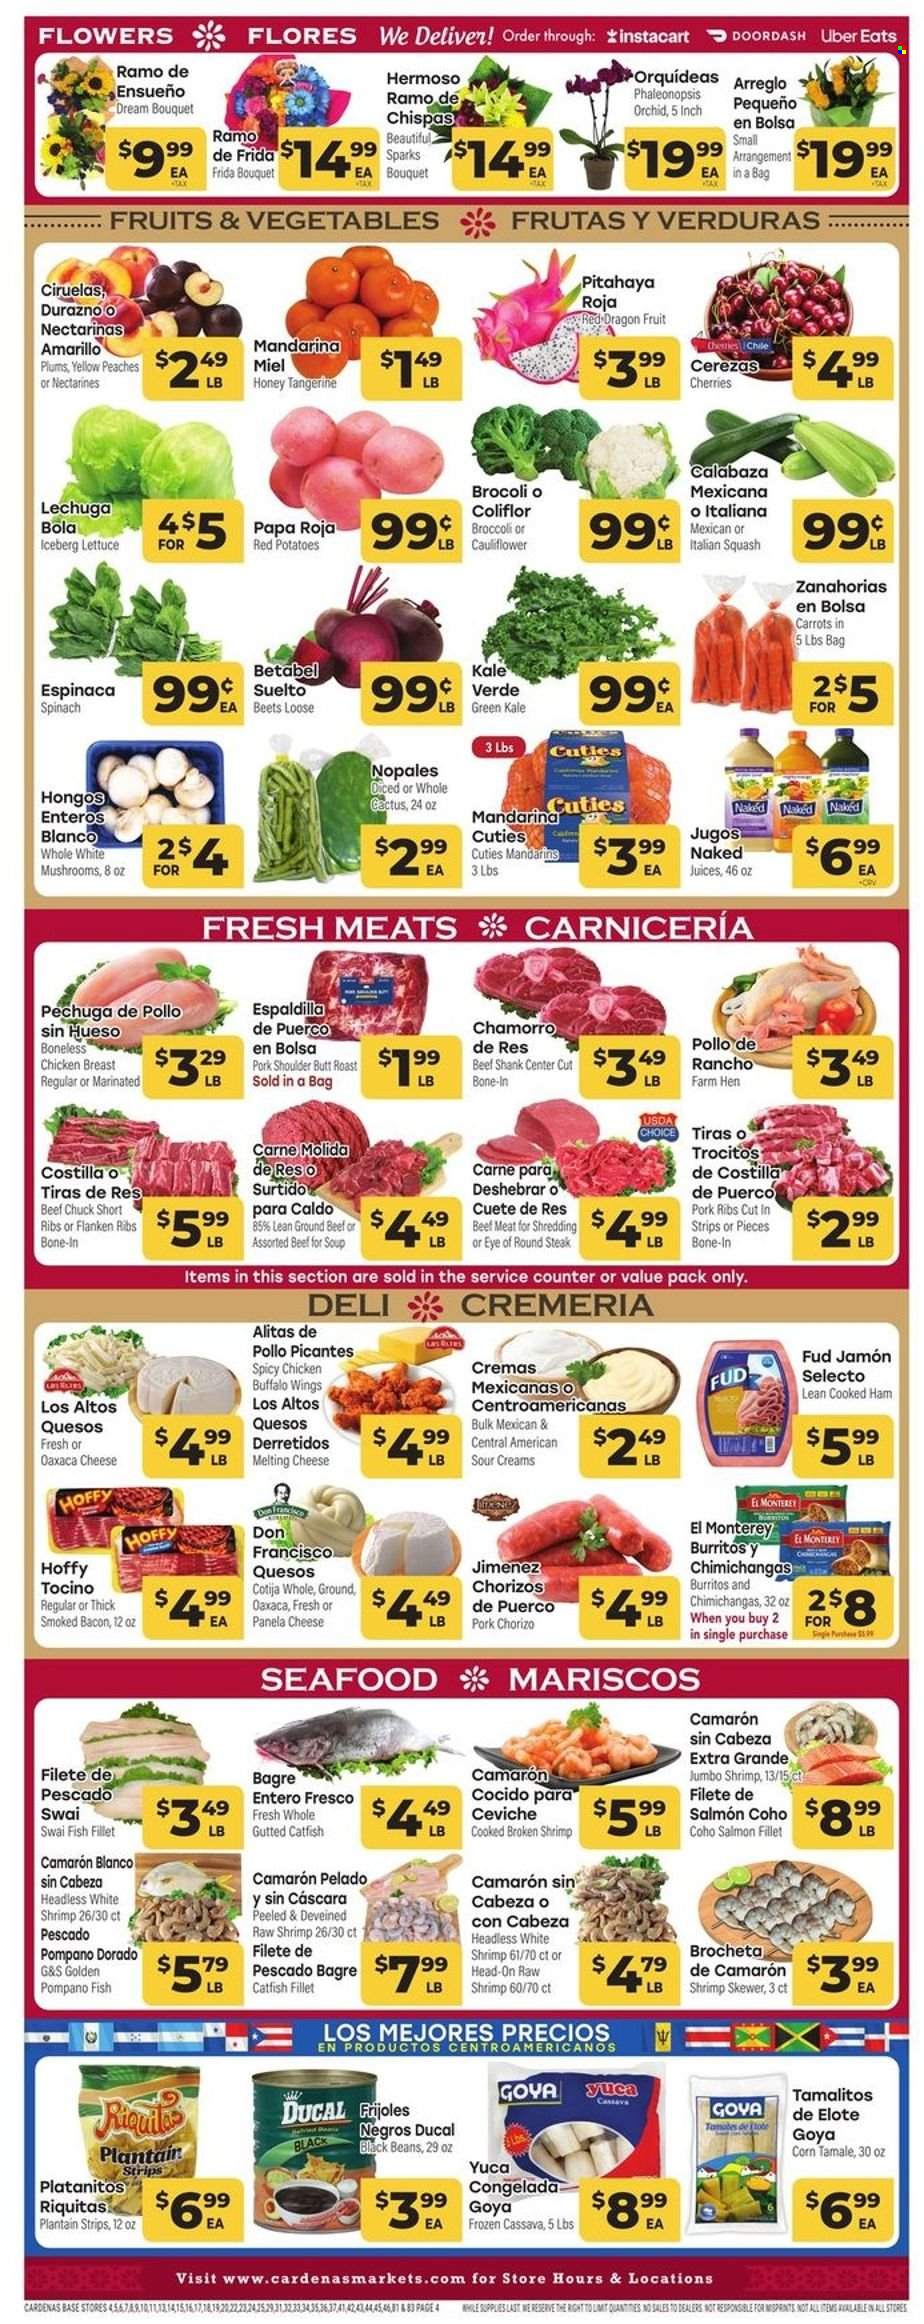 thumbnail - Cardenas Flyer - 02/01/2023 - 02/07/2023 - Sales products - mushrooms, broccoli, carrots, cauliflower, corn, kale, potatoes, lettuce, cassava, mandarines, plums, cherries, dragon fruit, catfish, fish fillets, salmon, salmon fillet, pompano, seafood, fish, shrimps, swai fillet, soup, burrito, bacon, cooked ham, ham, chorizo, cheese, Panela cheese, sour cream, strips, black beans, Goya, honey, juice, chicken breasts, beef meat, beef shank, ground beef, steak, eye of round, round steak, ribs, pork meat, pork ribs, pork shoulder, tote, cactus, bouquet, nectarines, peaches. Page 4.